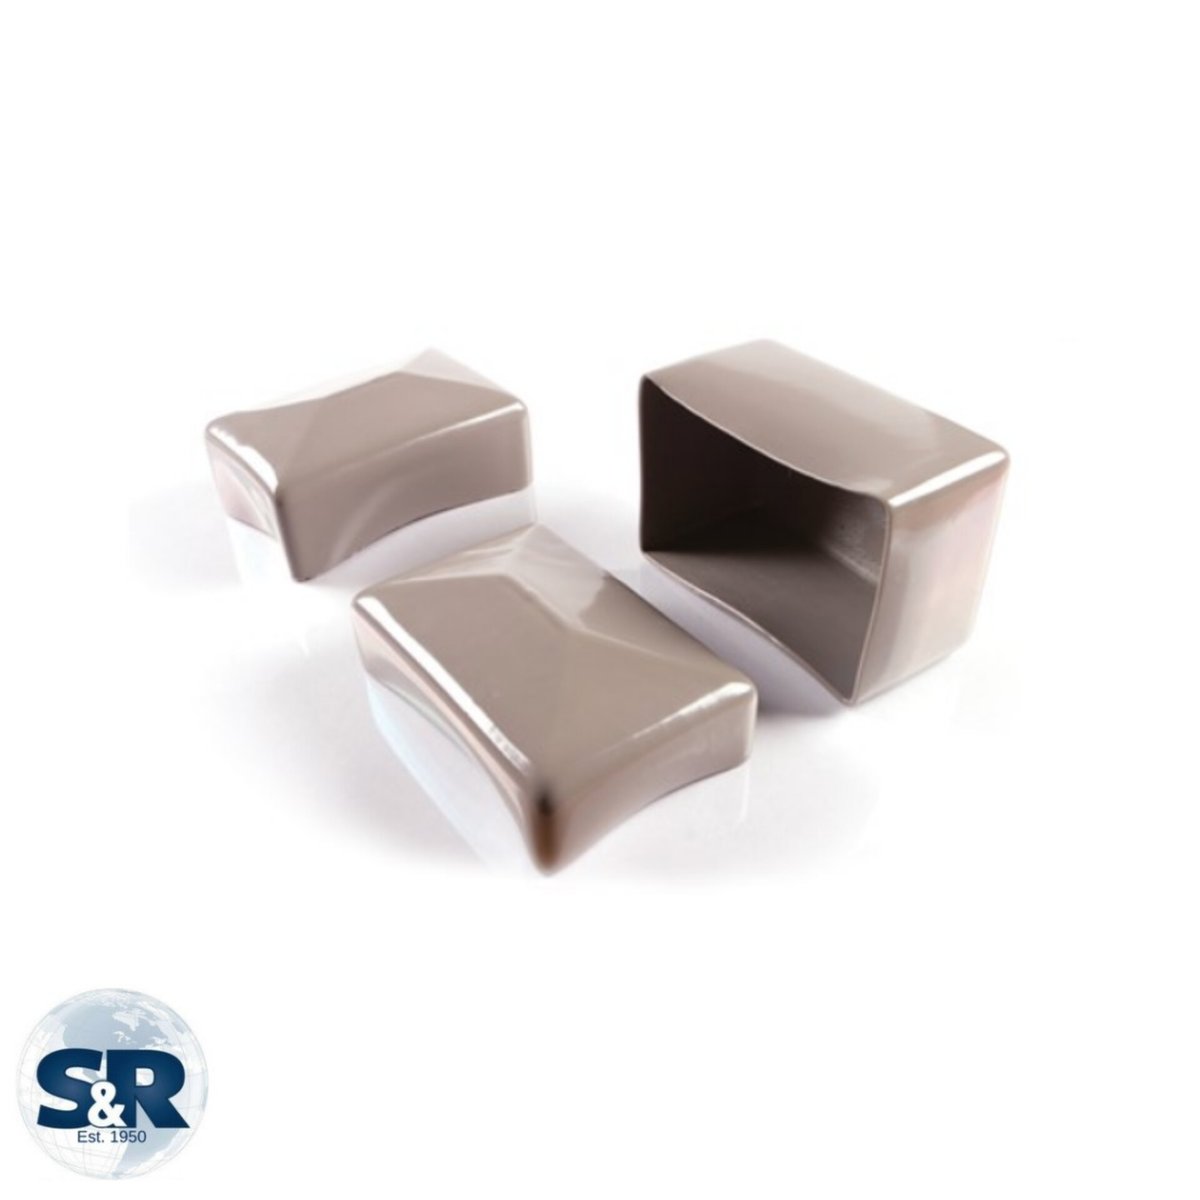 In our Flexible Caps range, we do Rectangular Flexible Caps made from #PVC and they are a great way to finish and protect #tubes #posts #bars
To explore the range: sinclair-rush.co.uk/categories/cap…
#ukmanufacturing #ukmanufacturer #vinyl #caps #finishing #dipmoulded